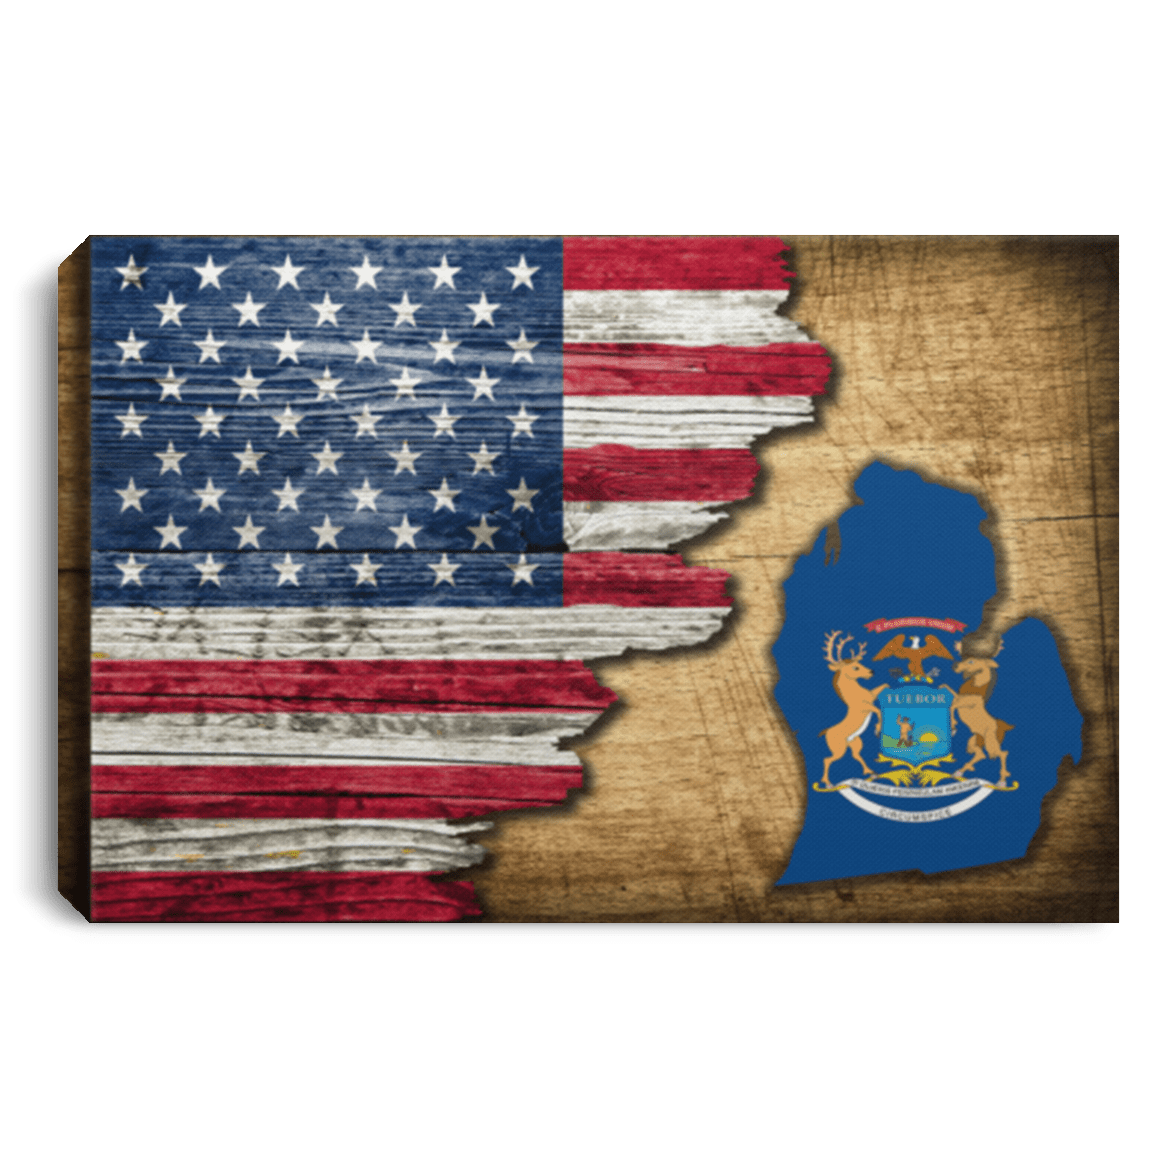 United States/Michigan Flag Ripped Effect 12X8 Inches Landscape Canvas .75In Frame